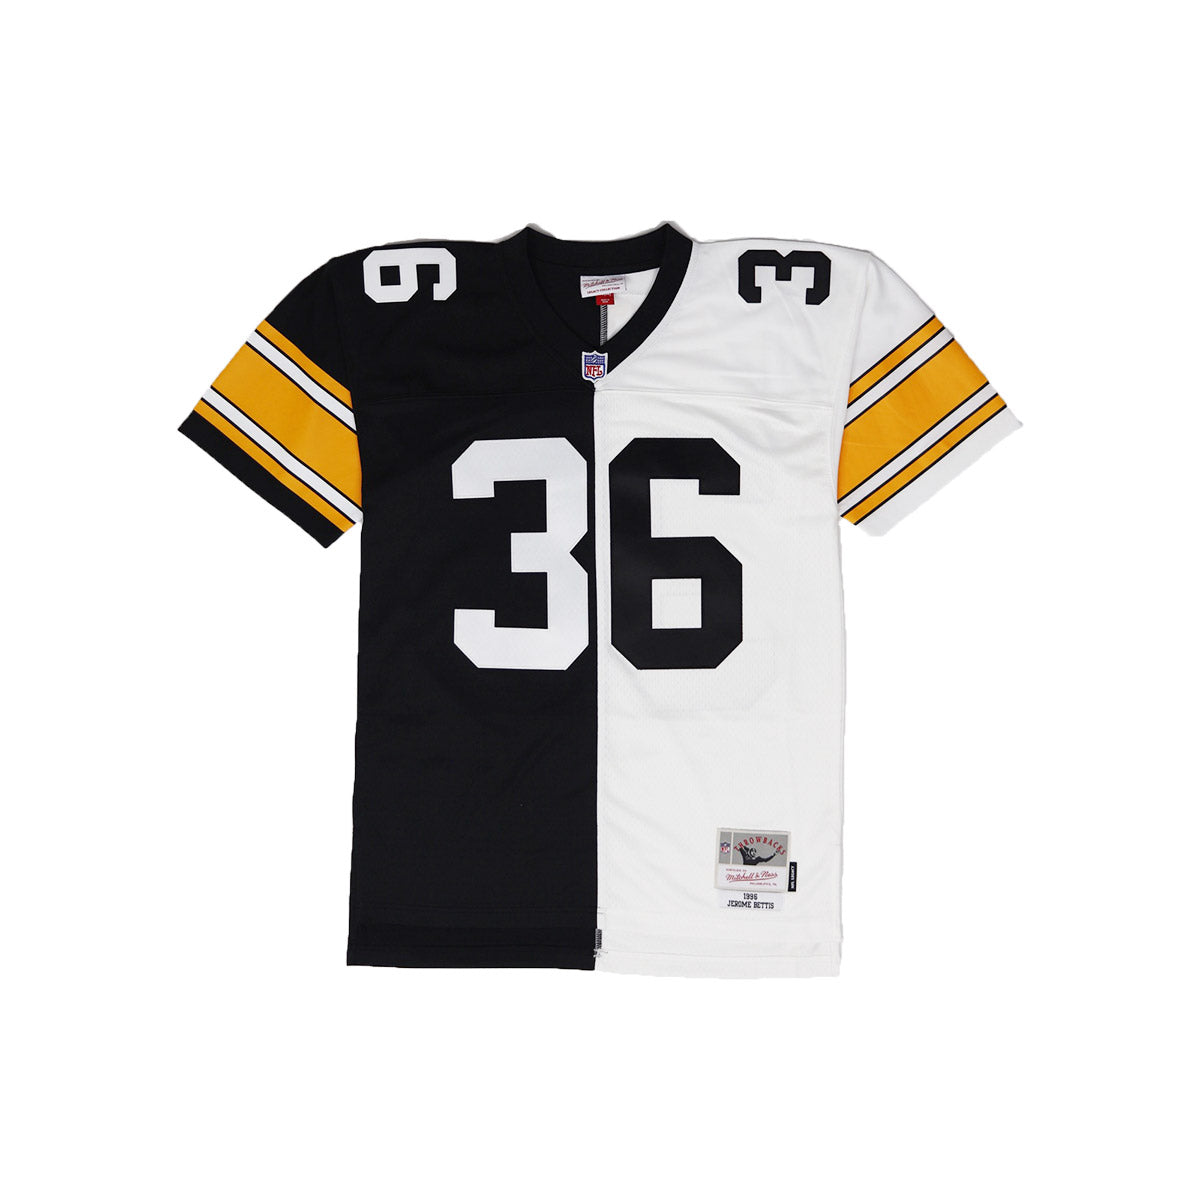 jerome bettis throwback jersey